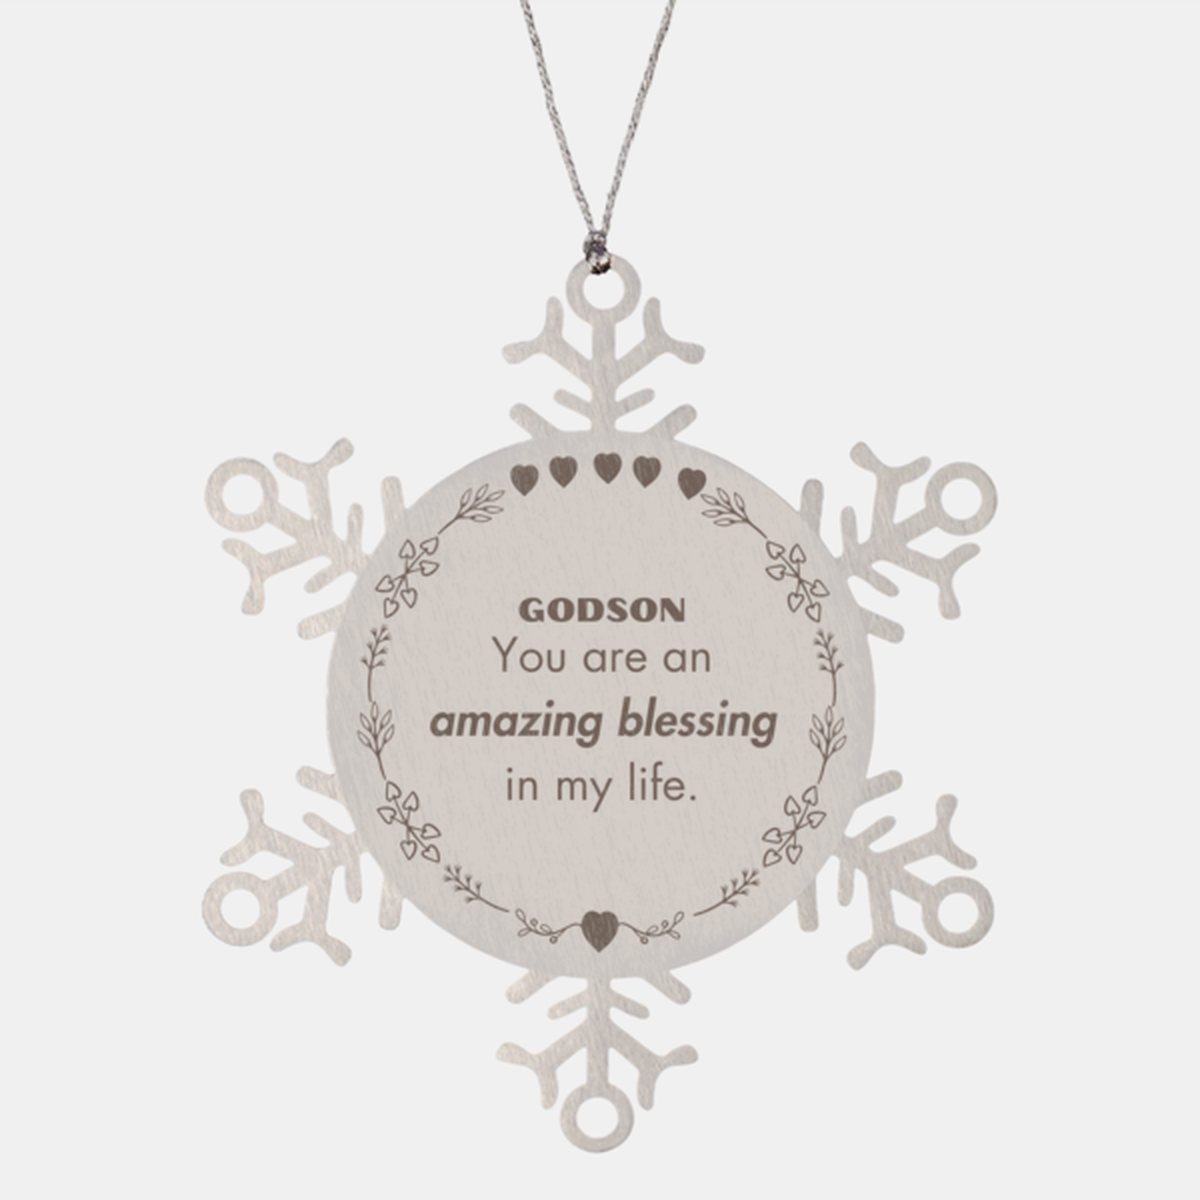 Godson Snowflake Ornament, You are an amazing blessing in my life, Thank You Gifts For Godson, Inspirational Birthday Christmas Unique Gifts For Godson